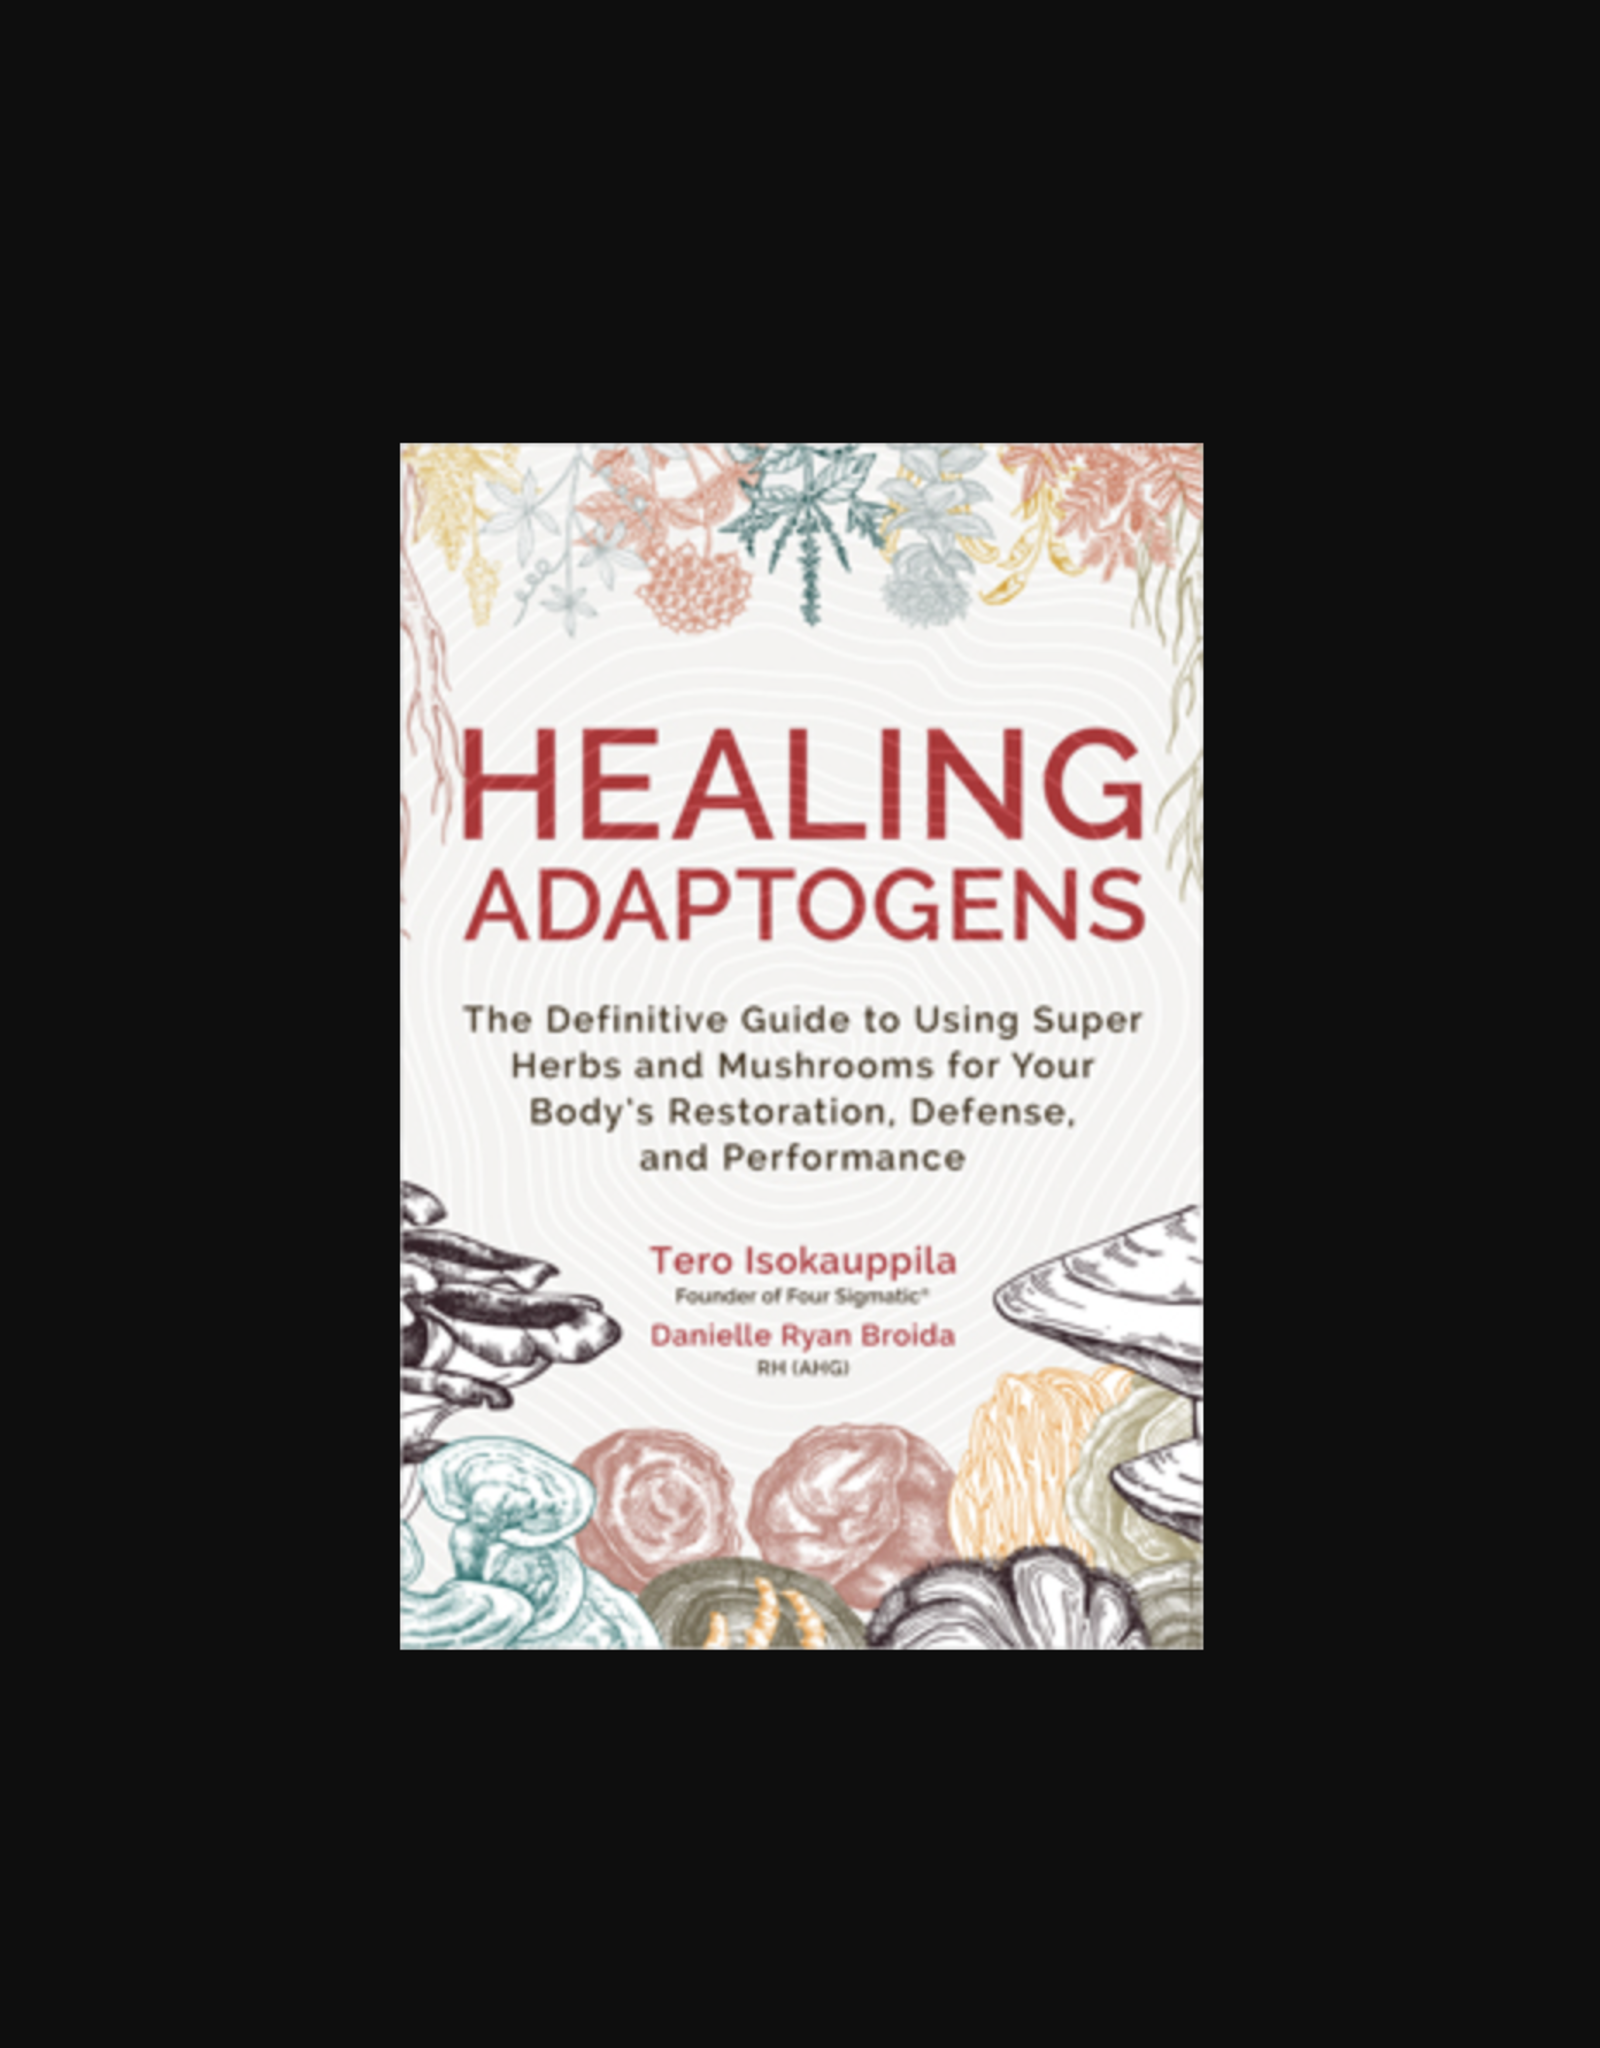 Healing Adaptogens - The Definitive Guide to Using Super Herbs and Mushrooms for Your Body's Restoration, Defense, and Performance